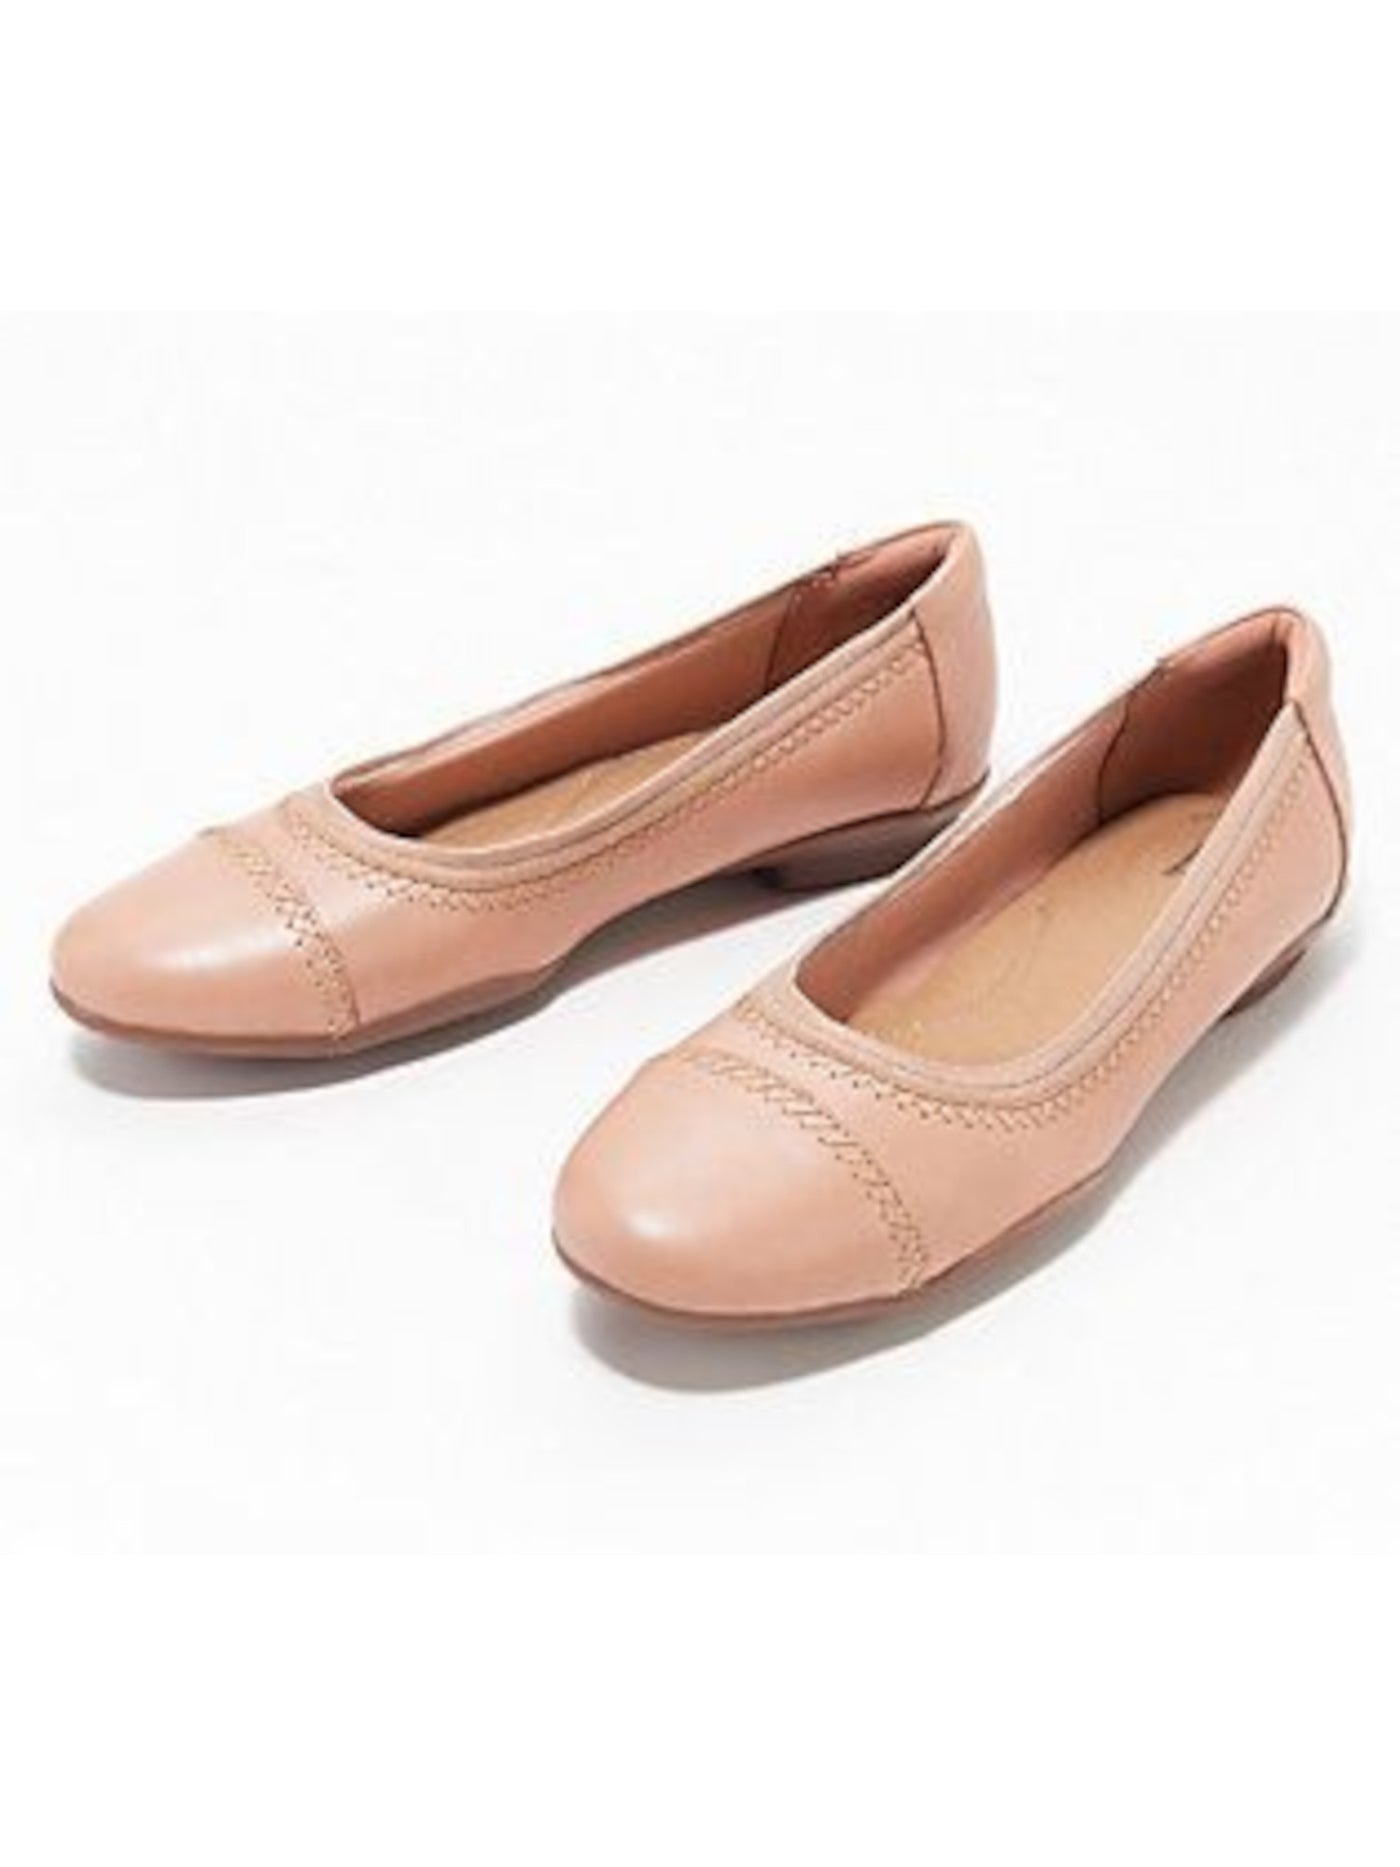 COLLECTION BY CLARKS Womens Pink Arch Support Padded Sara Bay Almond Toe Slip On Leather Flats Shoes 9.5 M